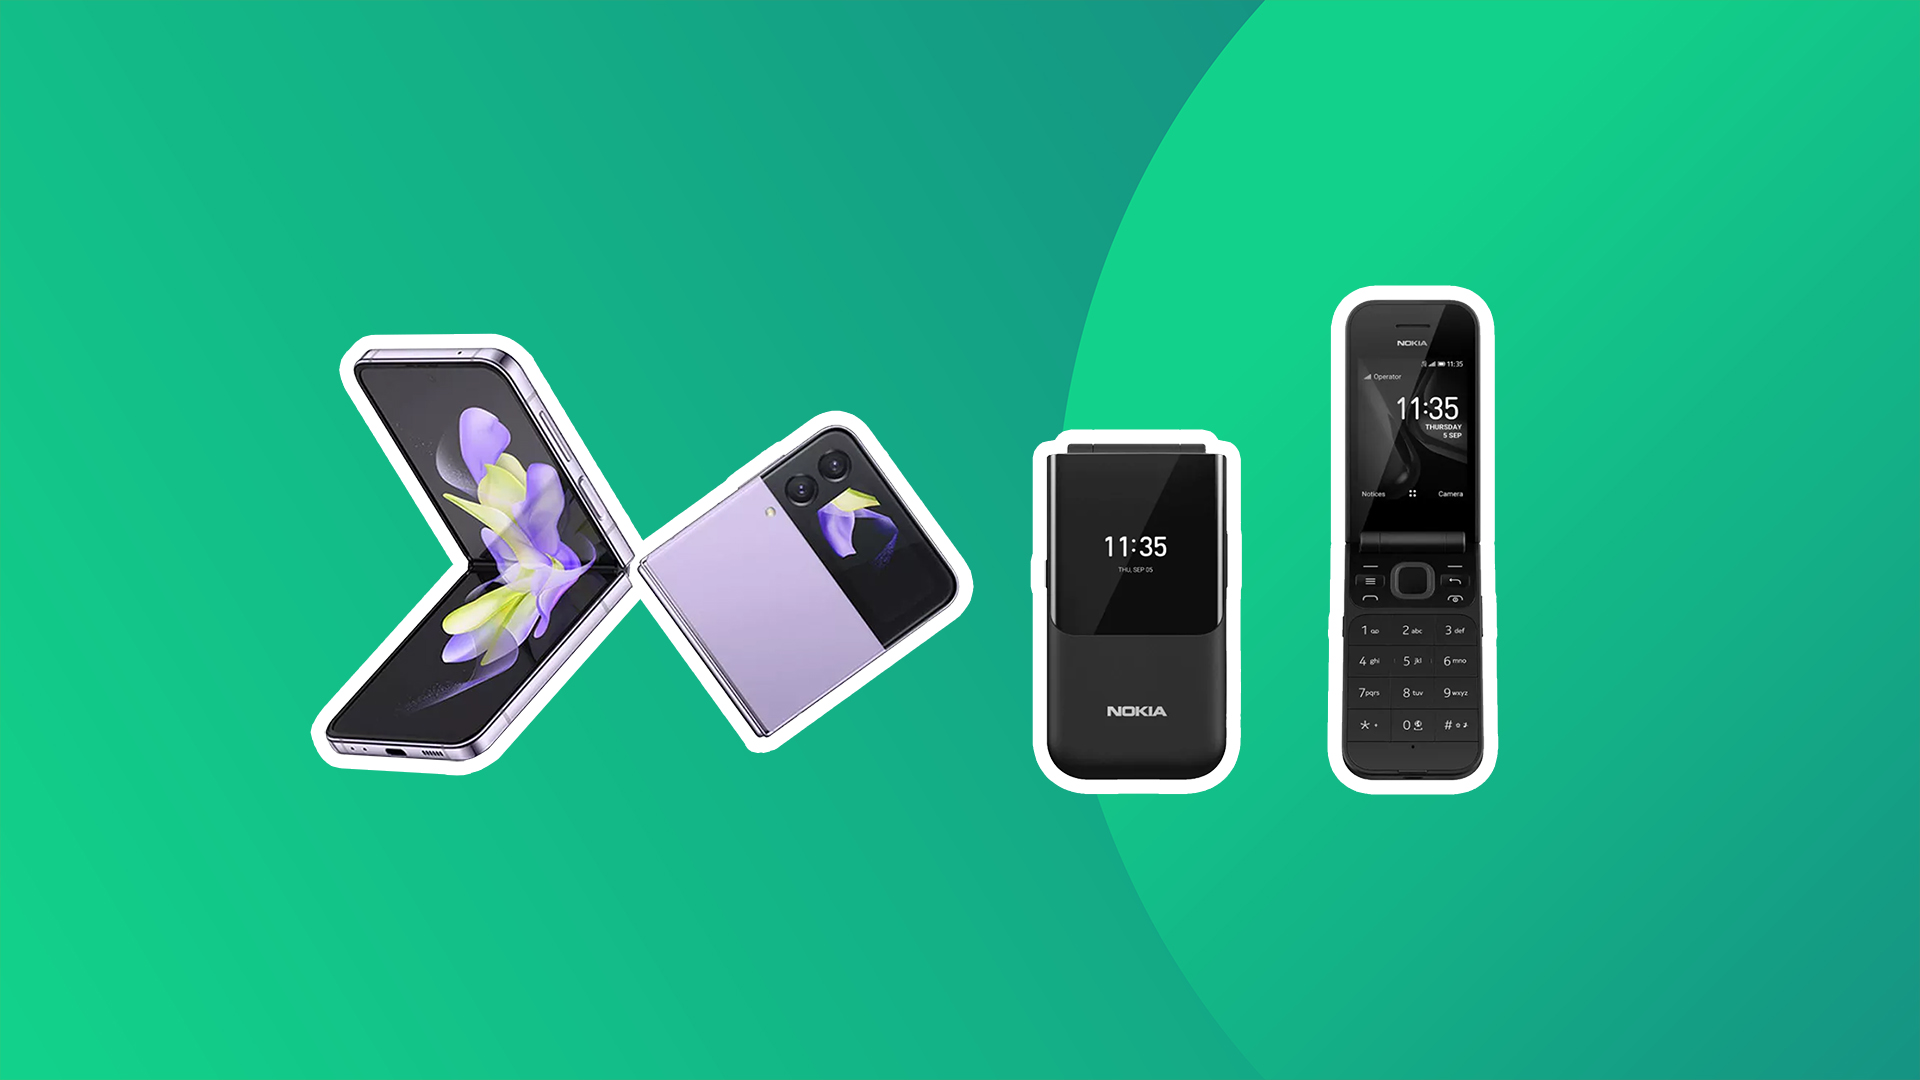 We found the best flip phone on the market for under £100 as Nokia